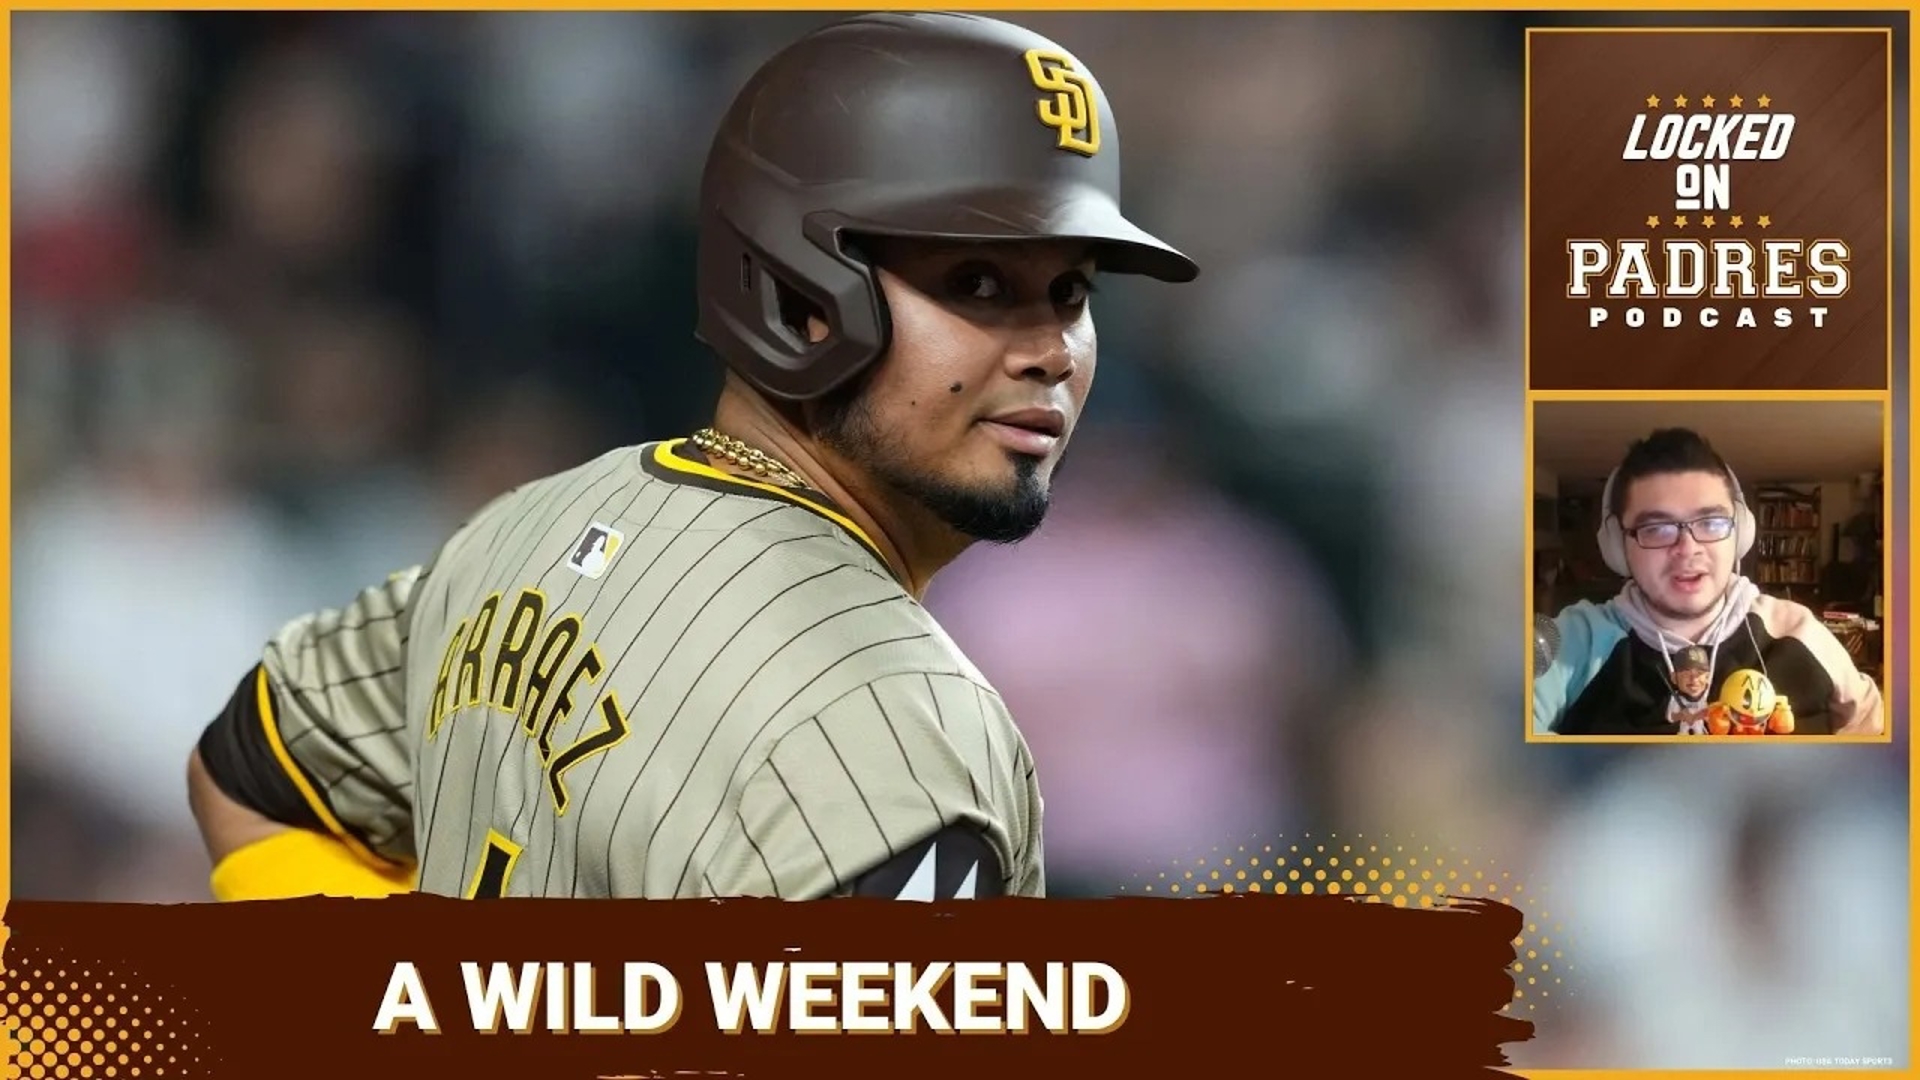 On today's episode, Javier recaps a WILD weekend in Padres world! He breaks down Matt Waldron's implosion and whether or not he should be replaced in the rotation.